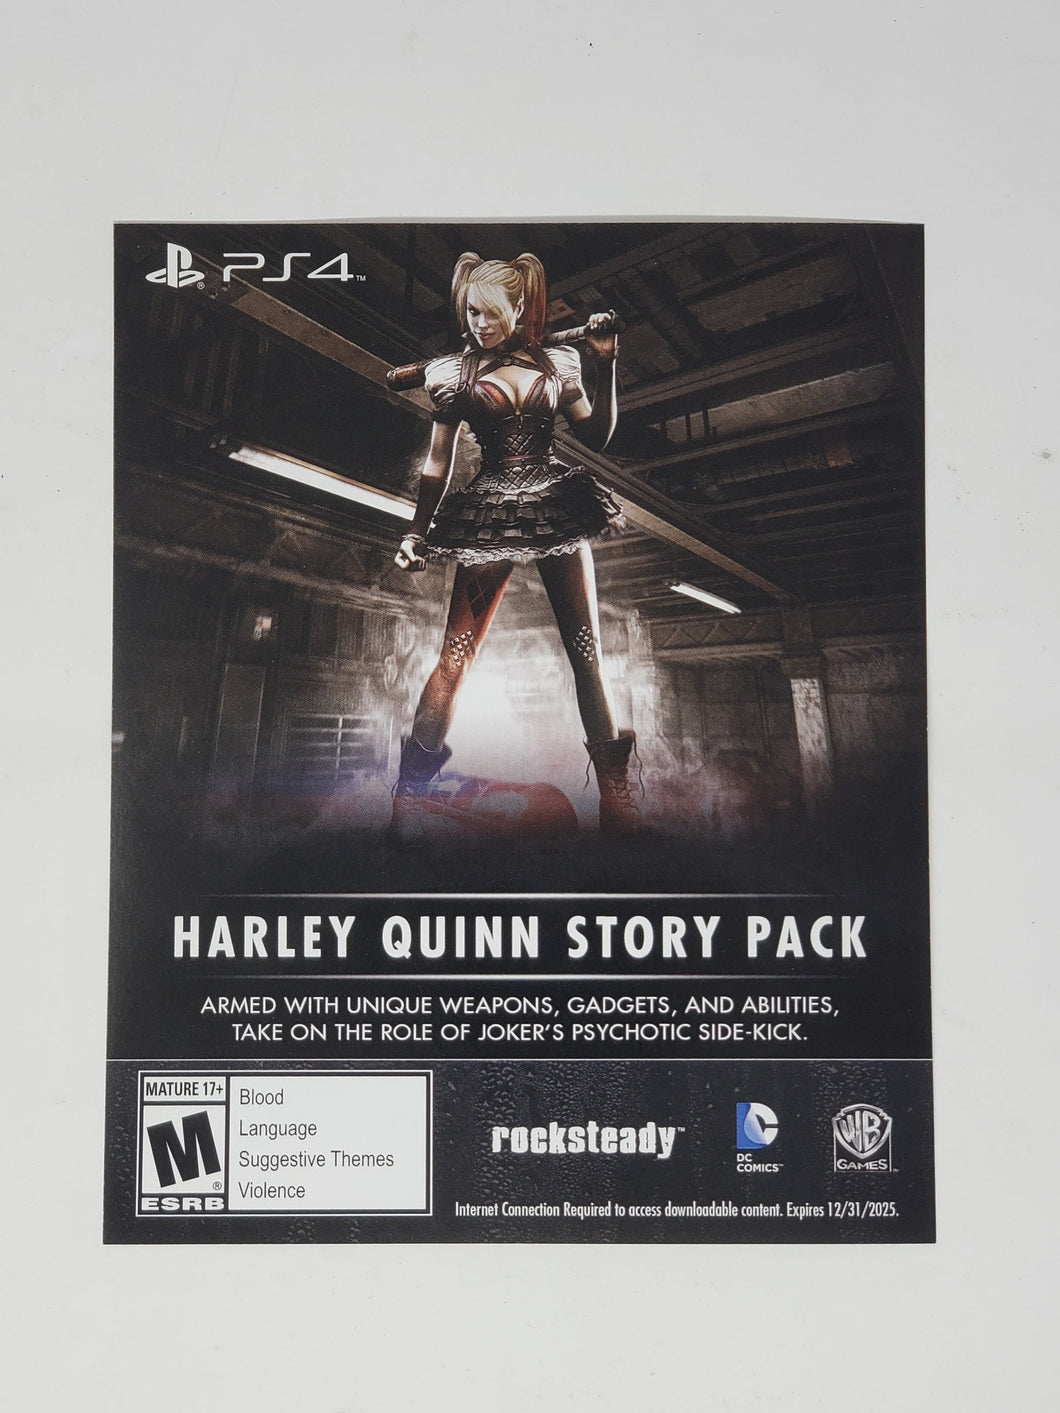 Harley Quinn Story Pack [Insertion] - Sony Playstation 4 | PS4